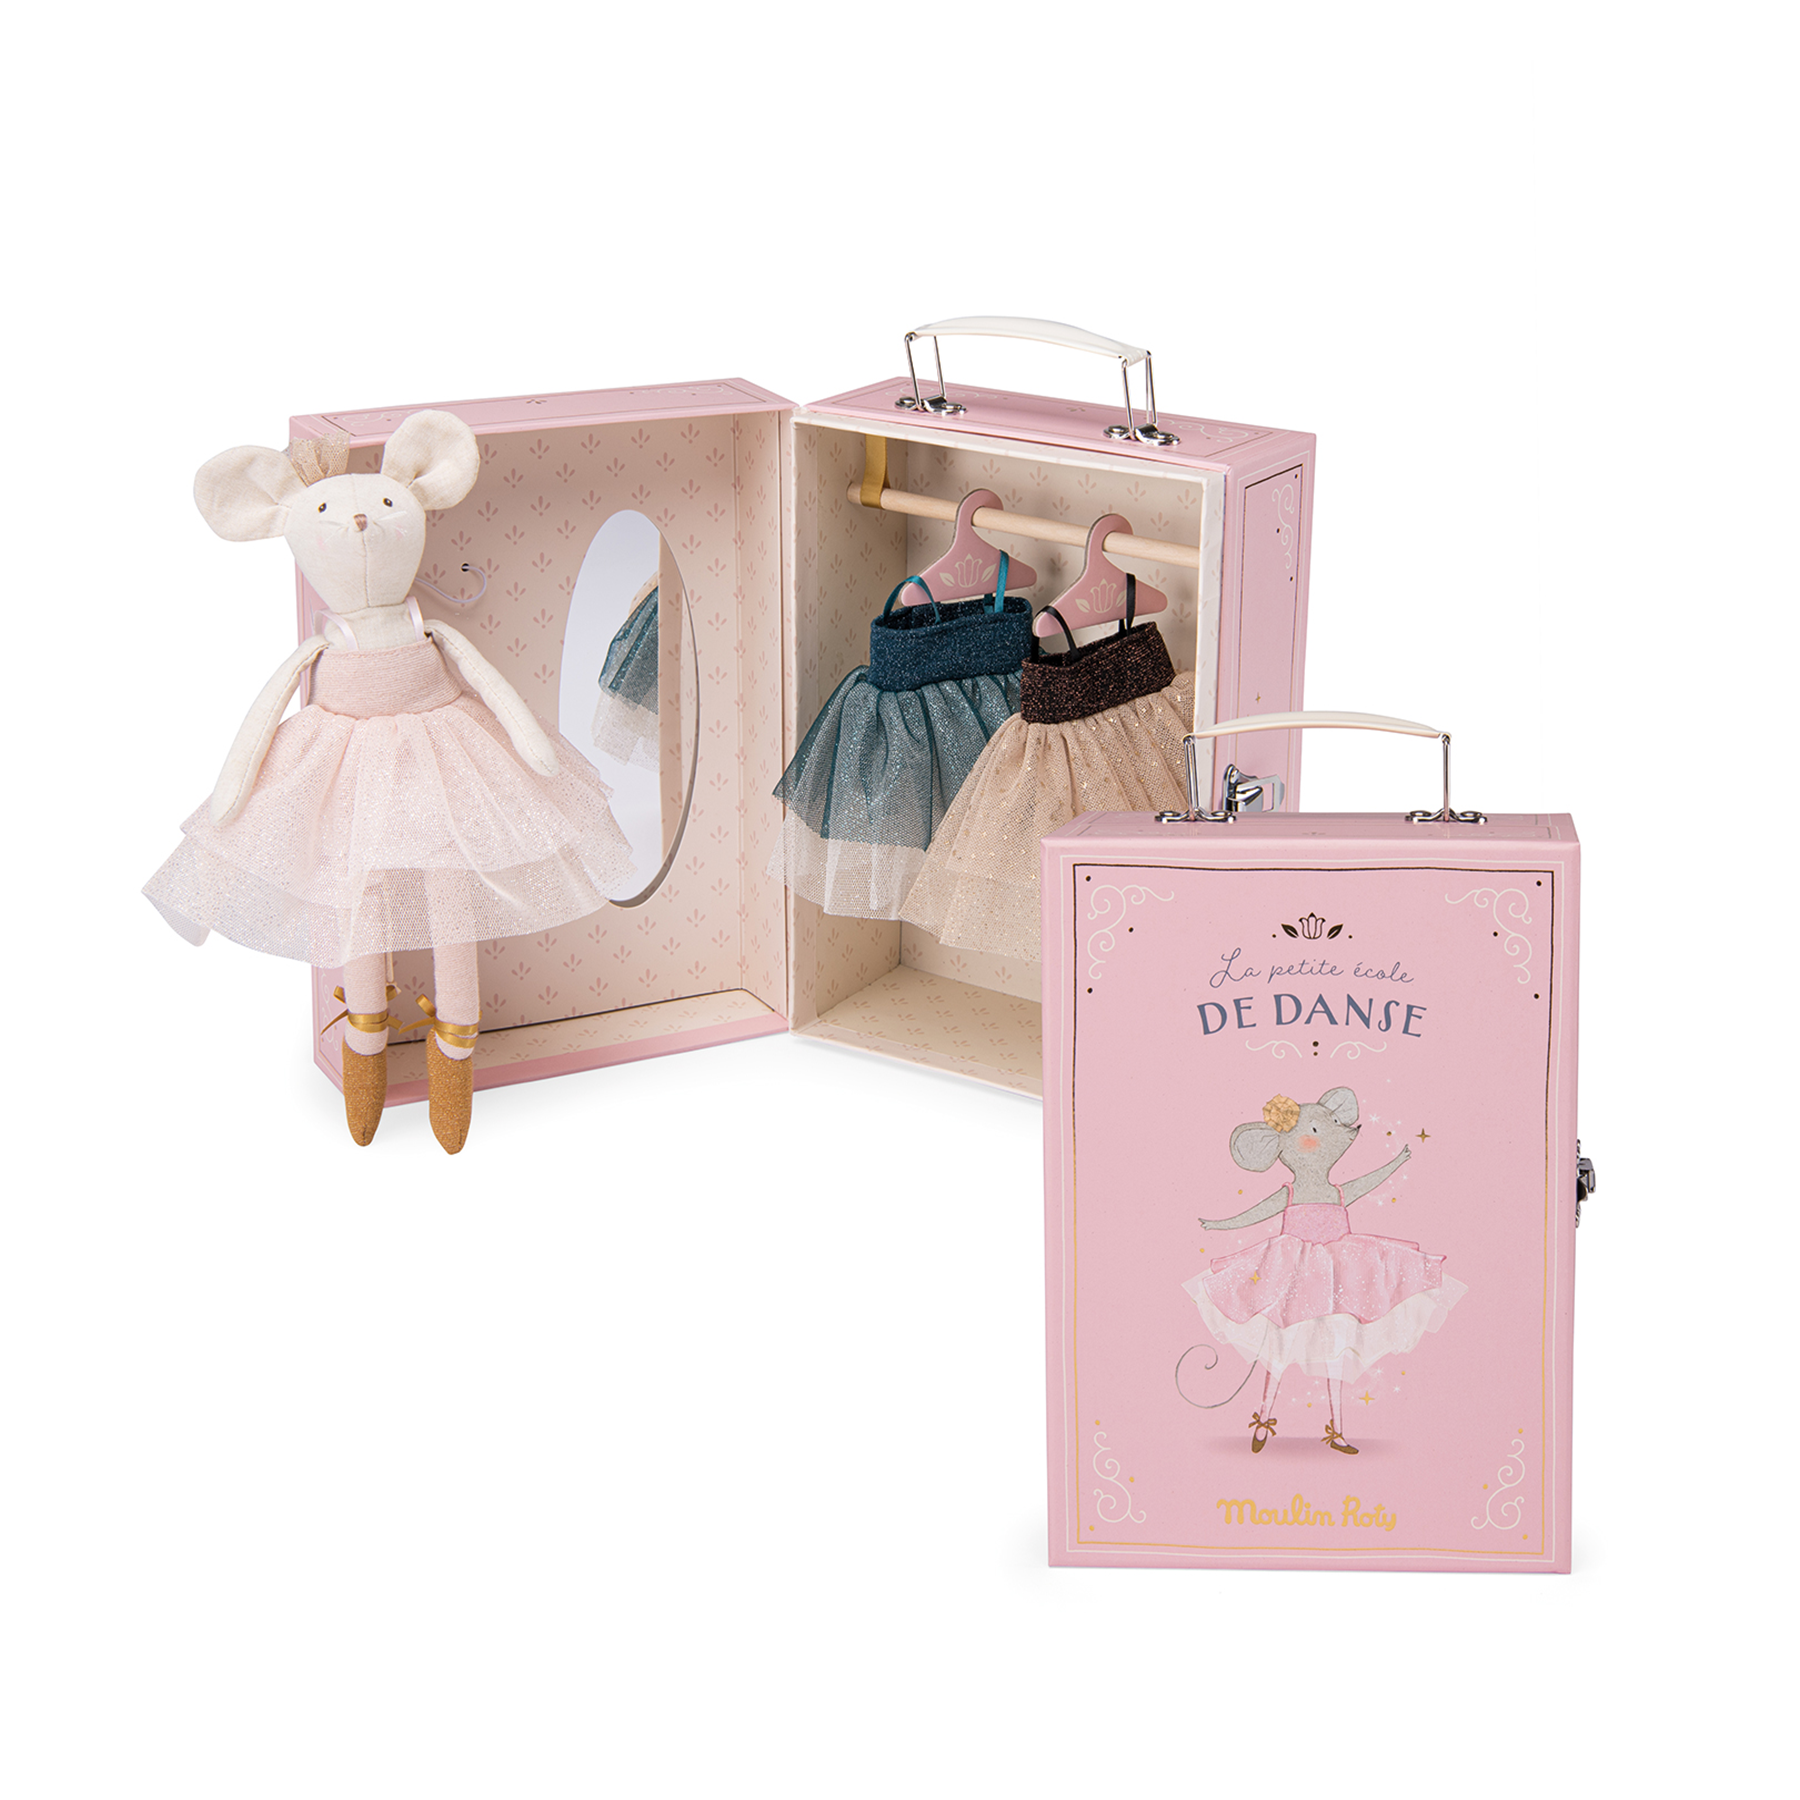 This adorable pink case includes a child-safe mirror, tutus to dress Ballerina Mouse in. Set includes: Ballerina Mouse doll, 3 hangers, 3 tutus, hanging rod.